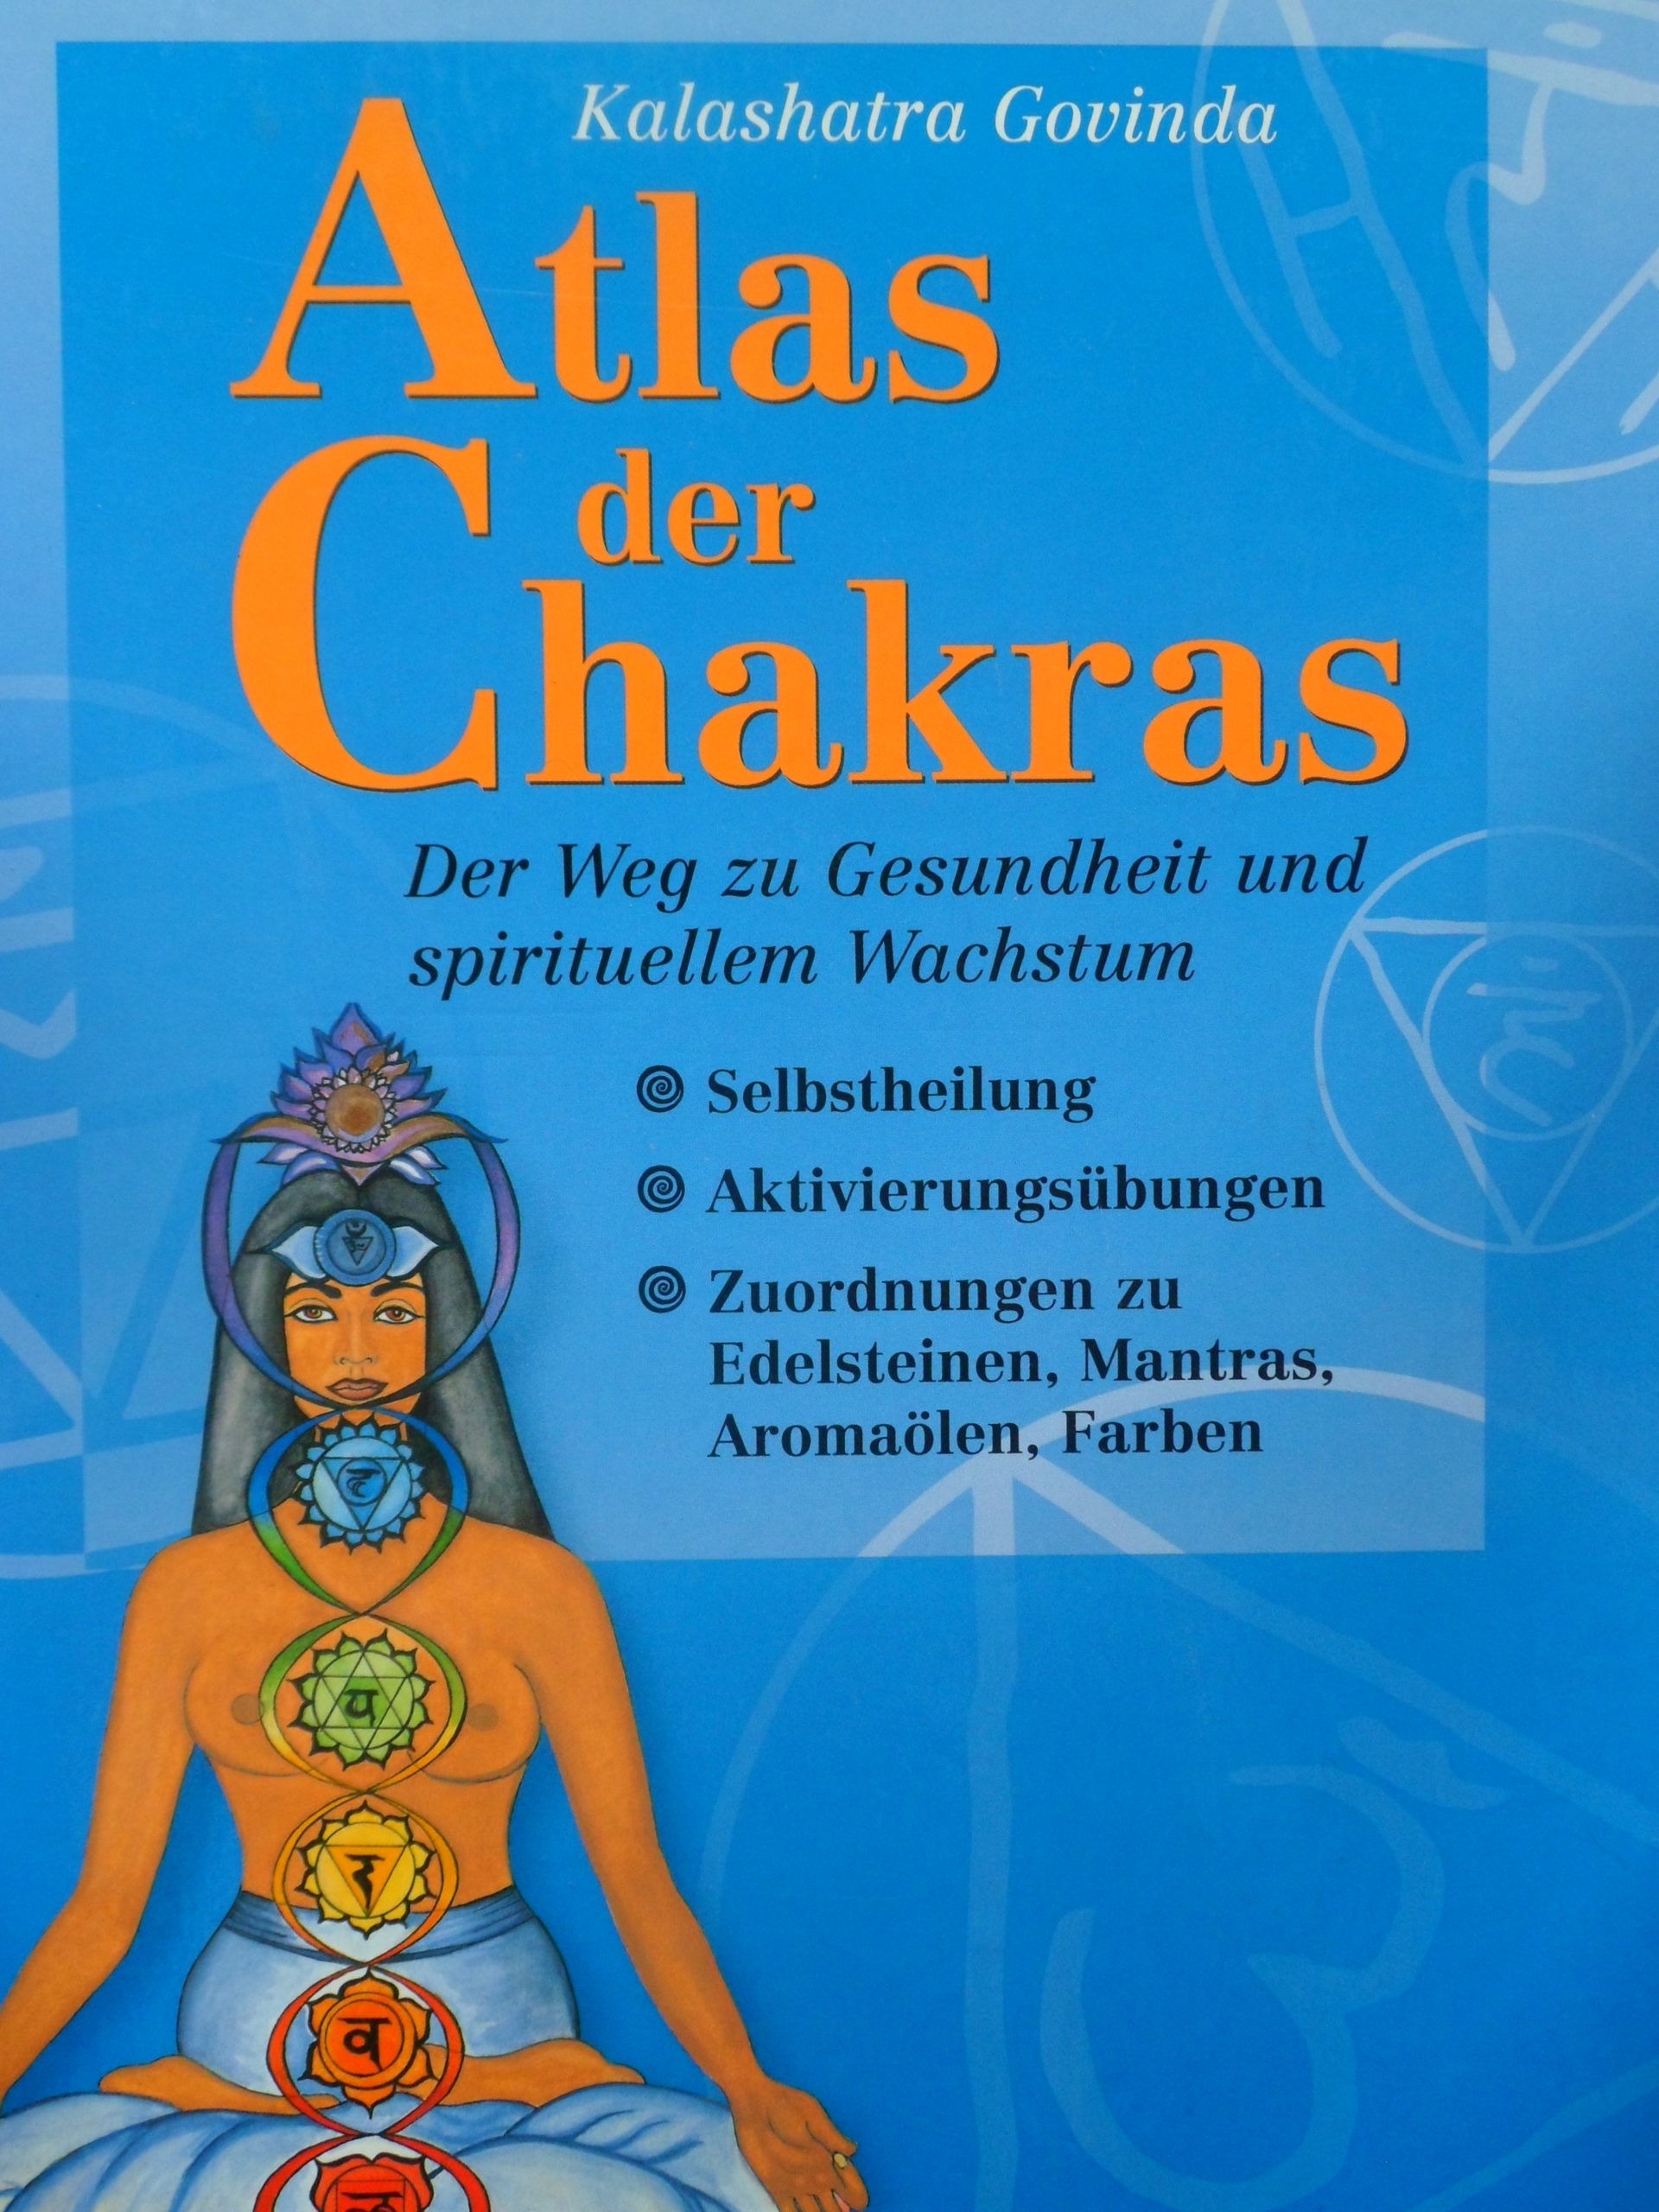 You are currently viewing Atlas der Chakras